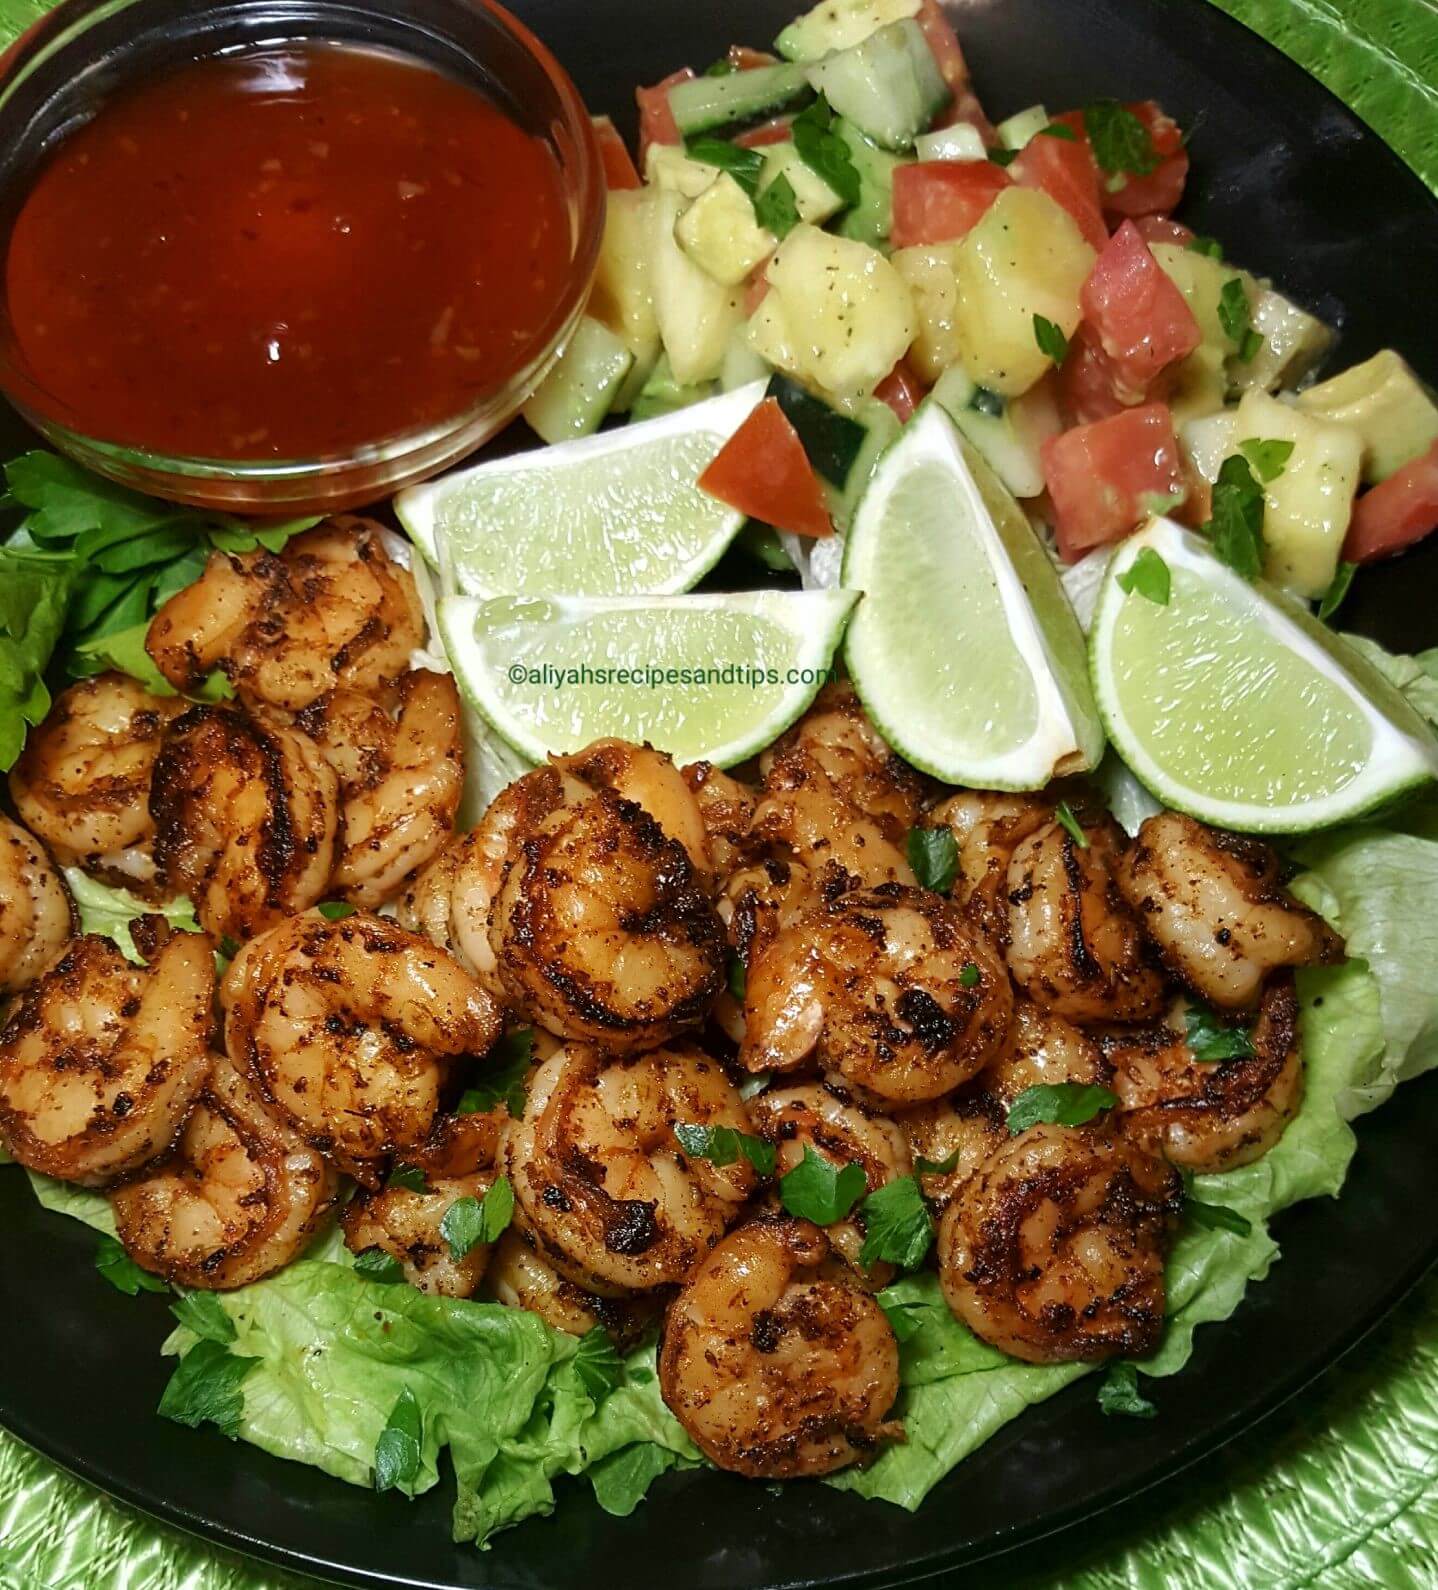 Blackened Shrimp, cajun, dinner, cucumber, wrap, dinner, patty, spinach, cocktail, blackened shrimp cajun blackened, blackened shrimp, blackened shrimps, cast iron, sauteed, pan, recipe, mac and cheese, old bay, easy, chicken, house, shrimp, pappadeaux, grilled, caesar salad, homemade, pasta, grit, taco, spicy